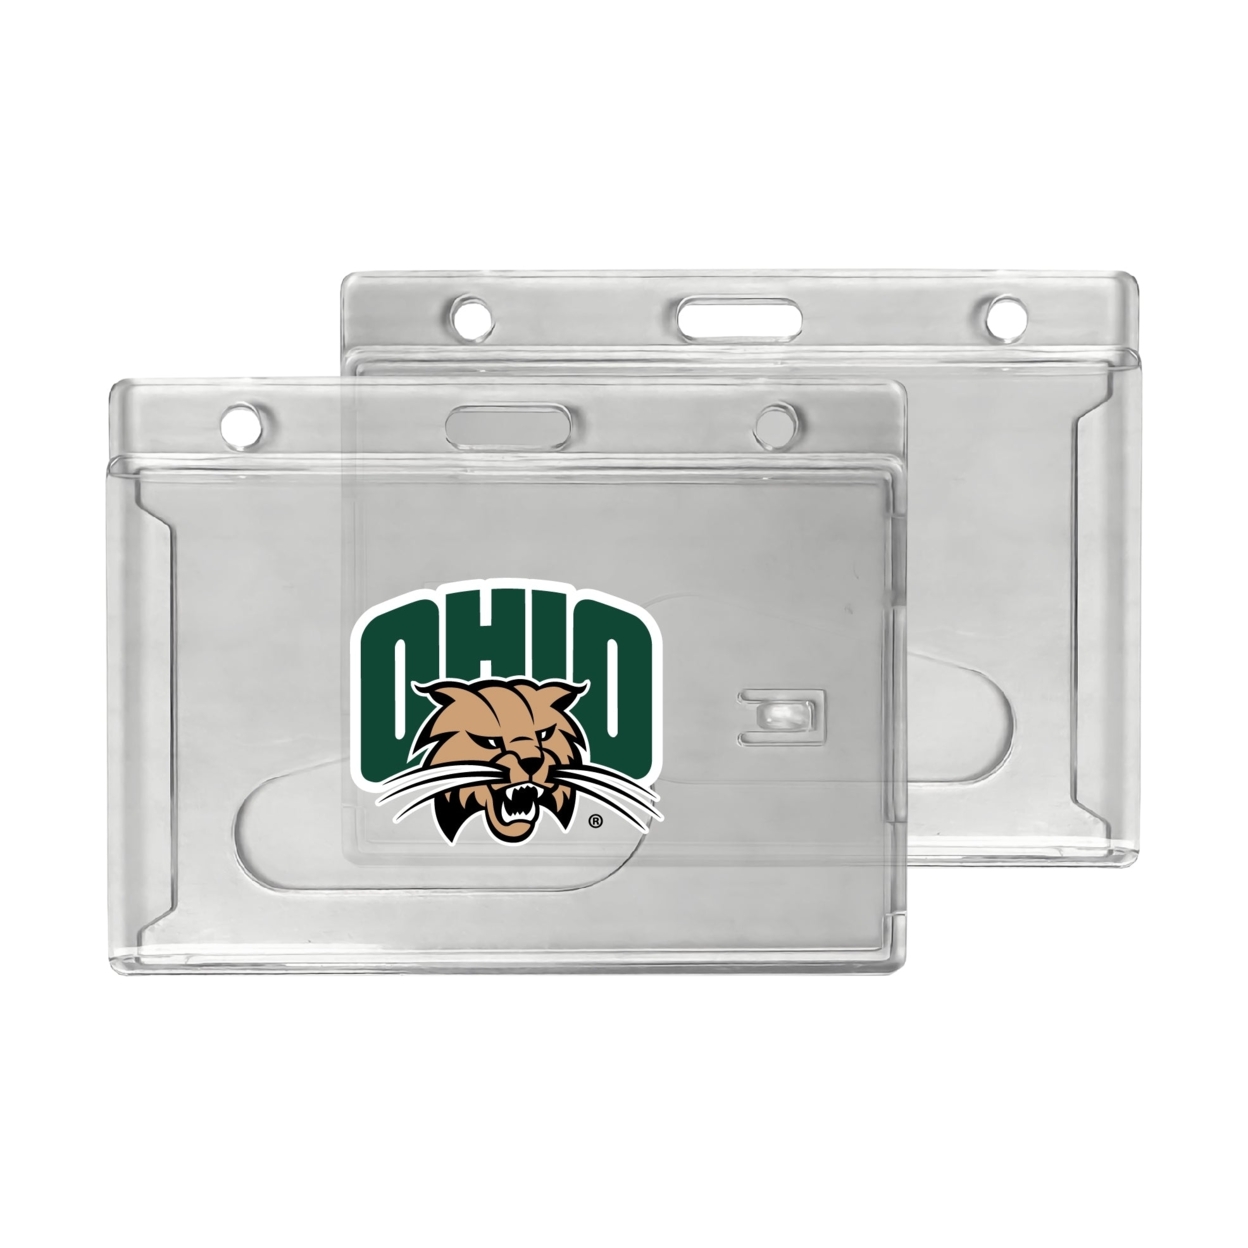 Ohio University Clear View ID Holder